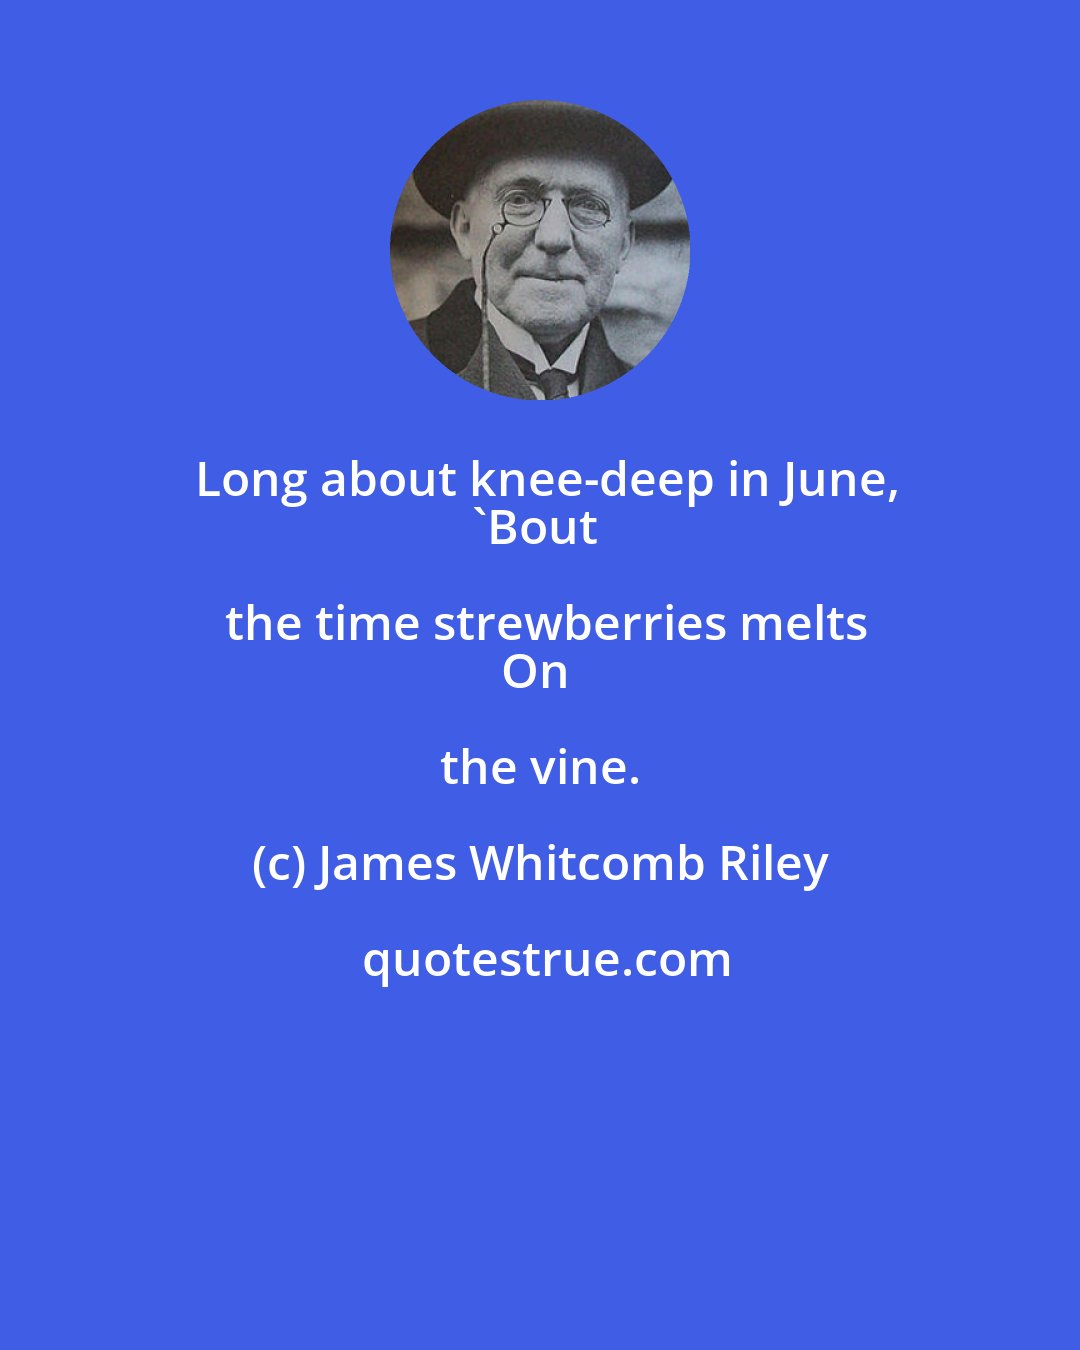 James Whitcomb Riley: Long about knee-deep in June,
'Bout the time strewberries melts
On the vine.